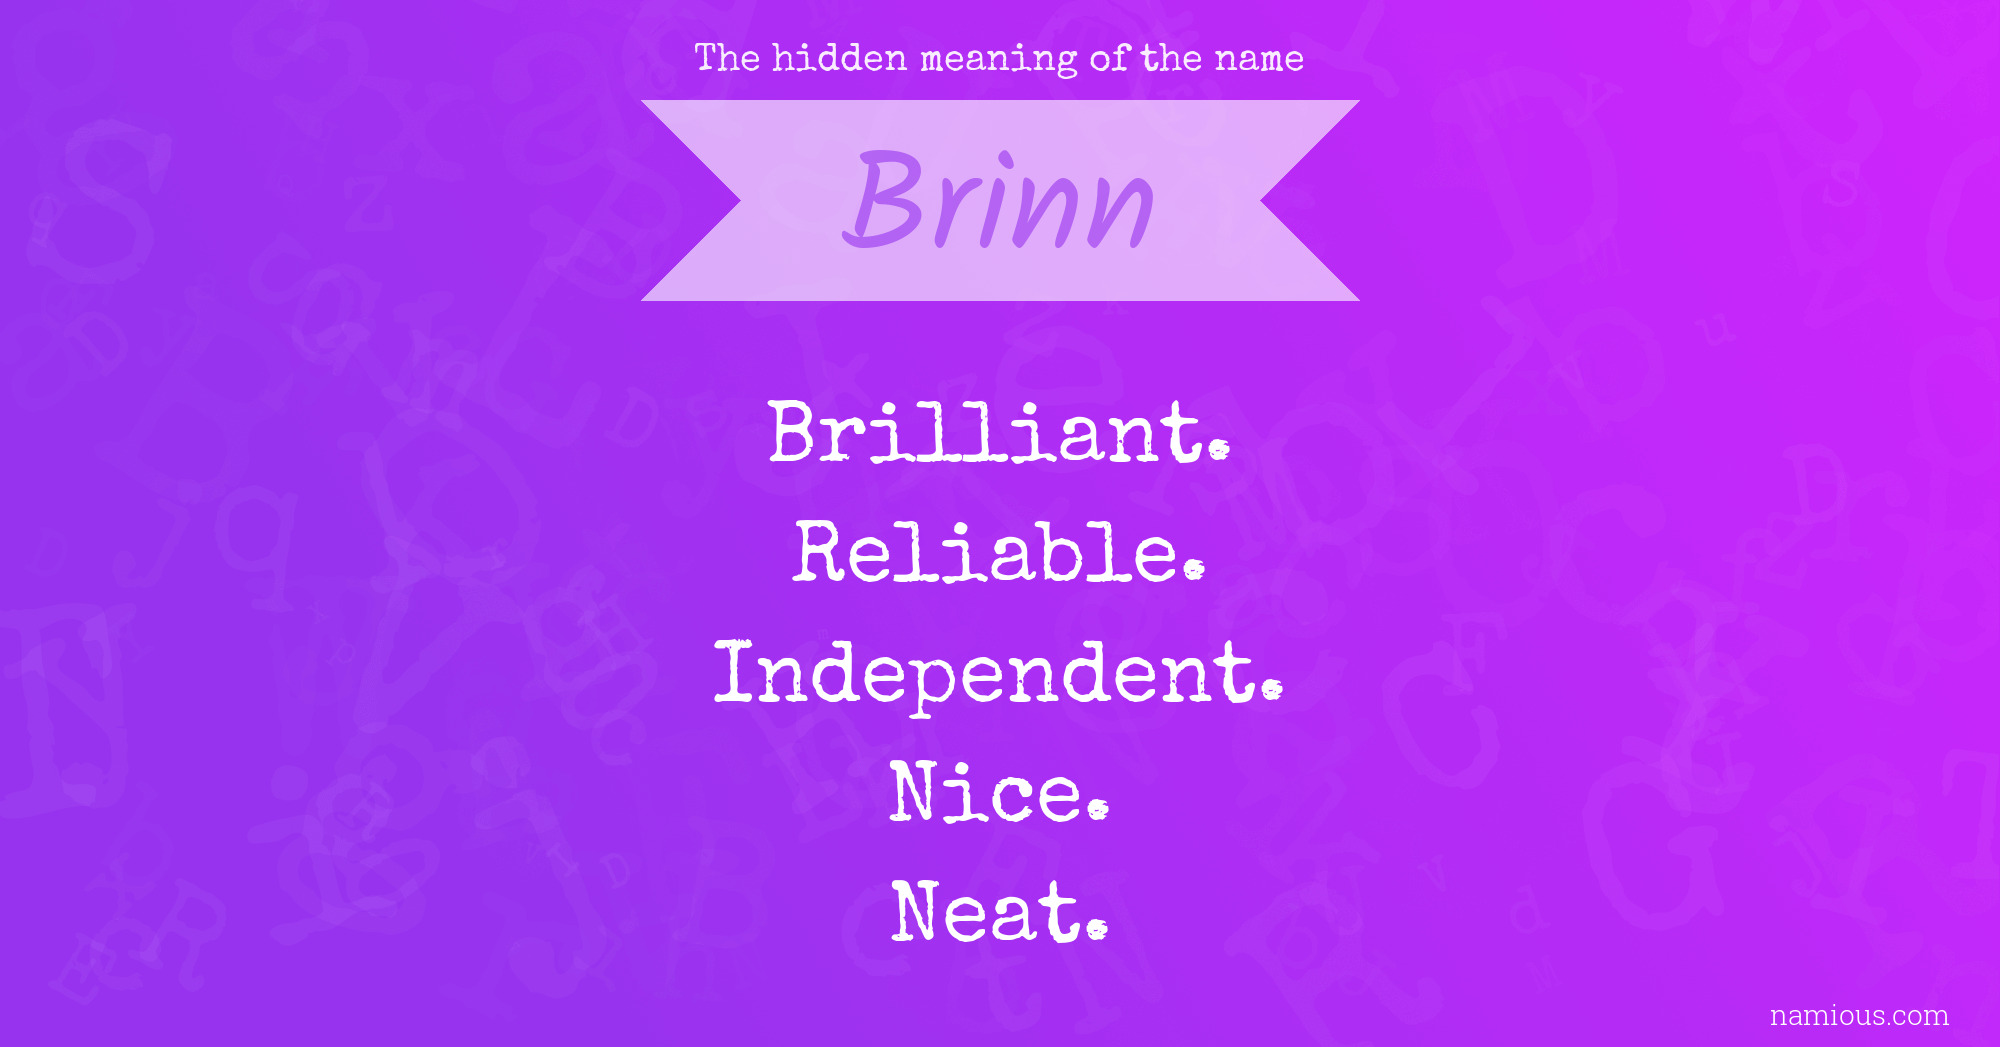 The hidden meaning of the name Brinn